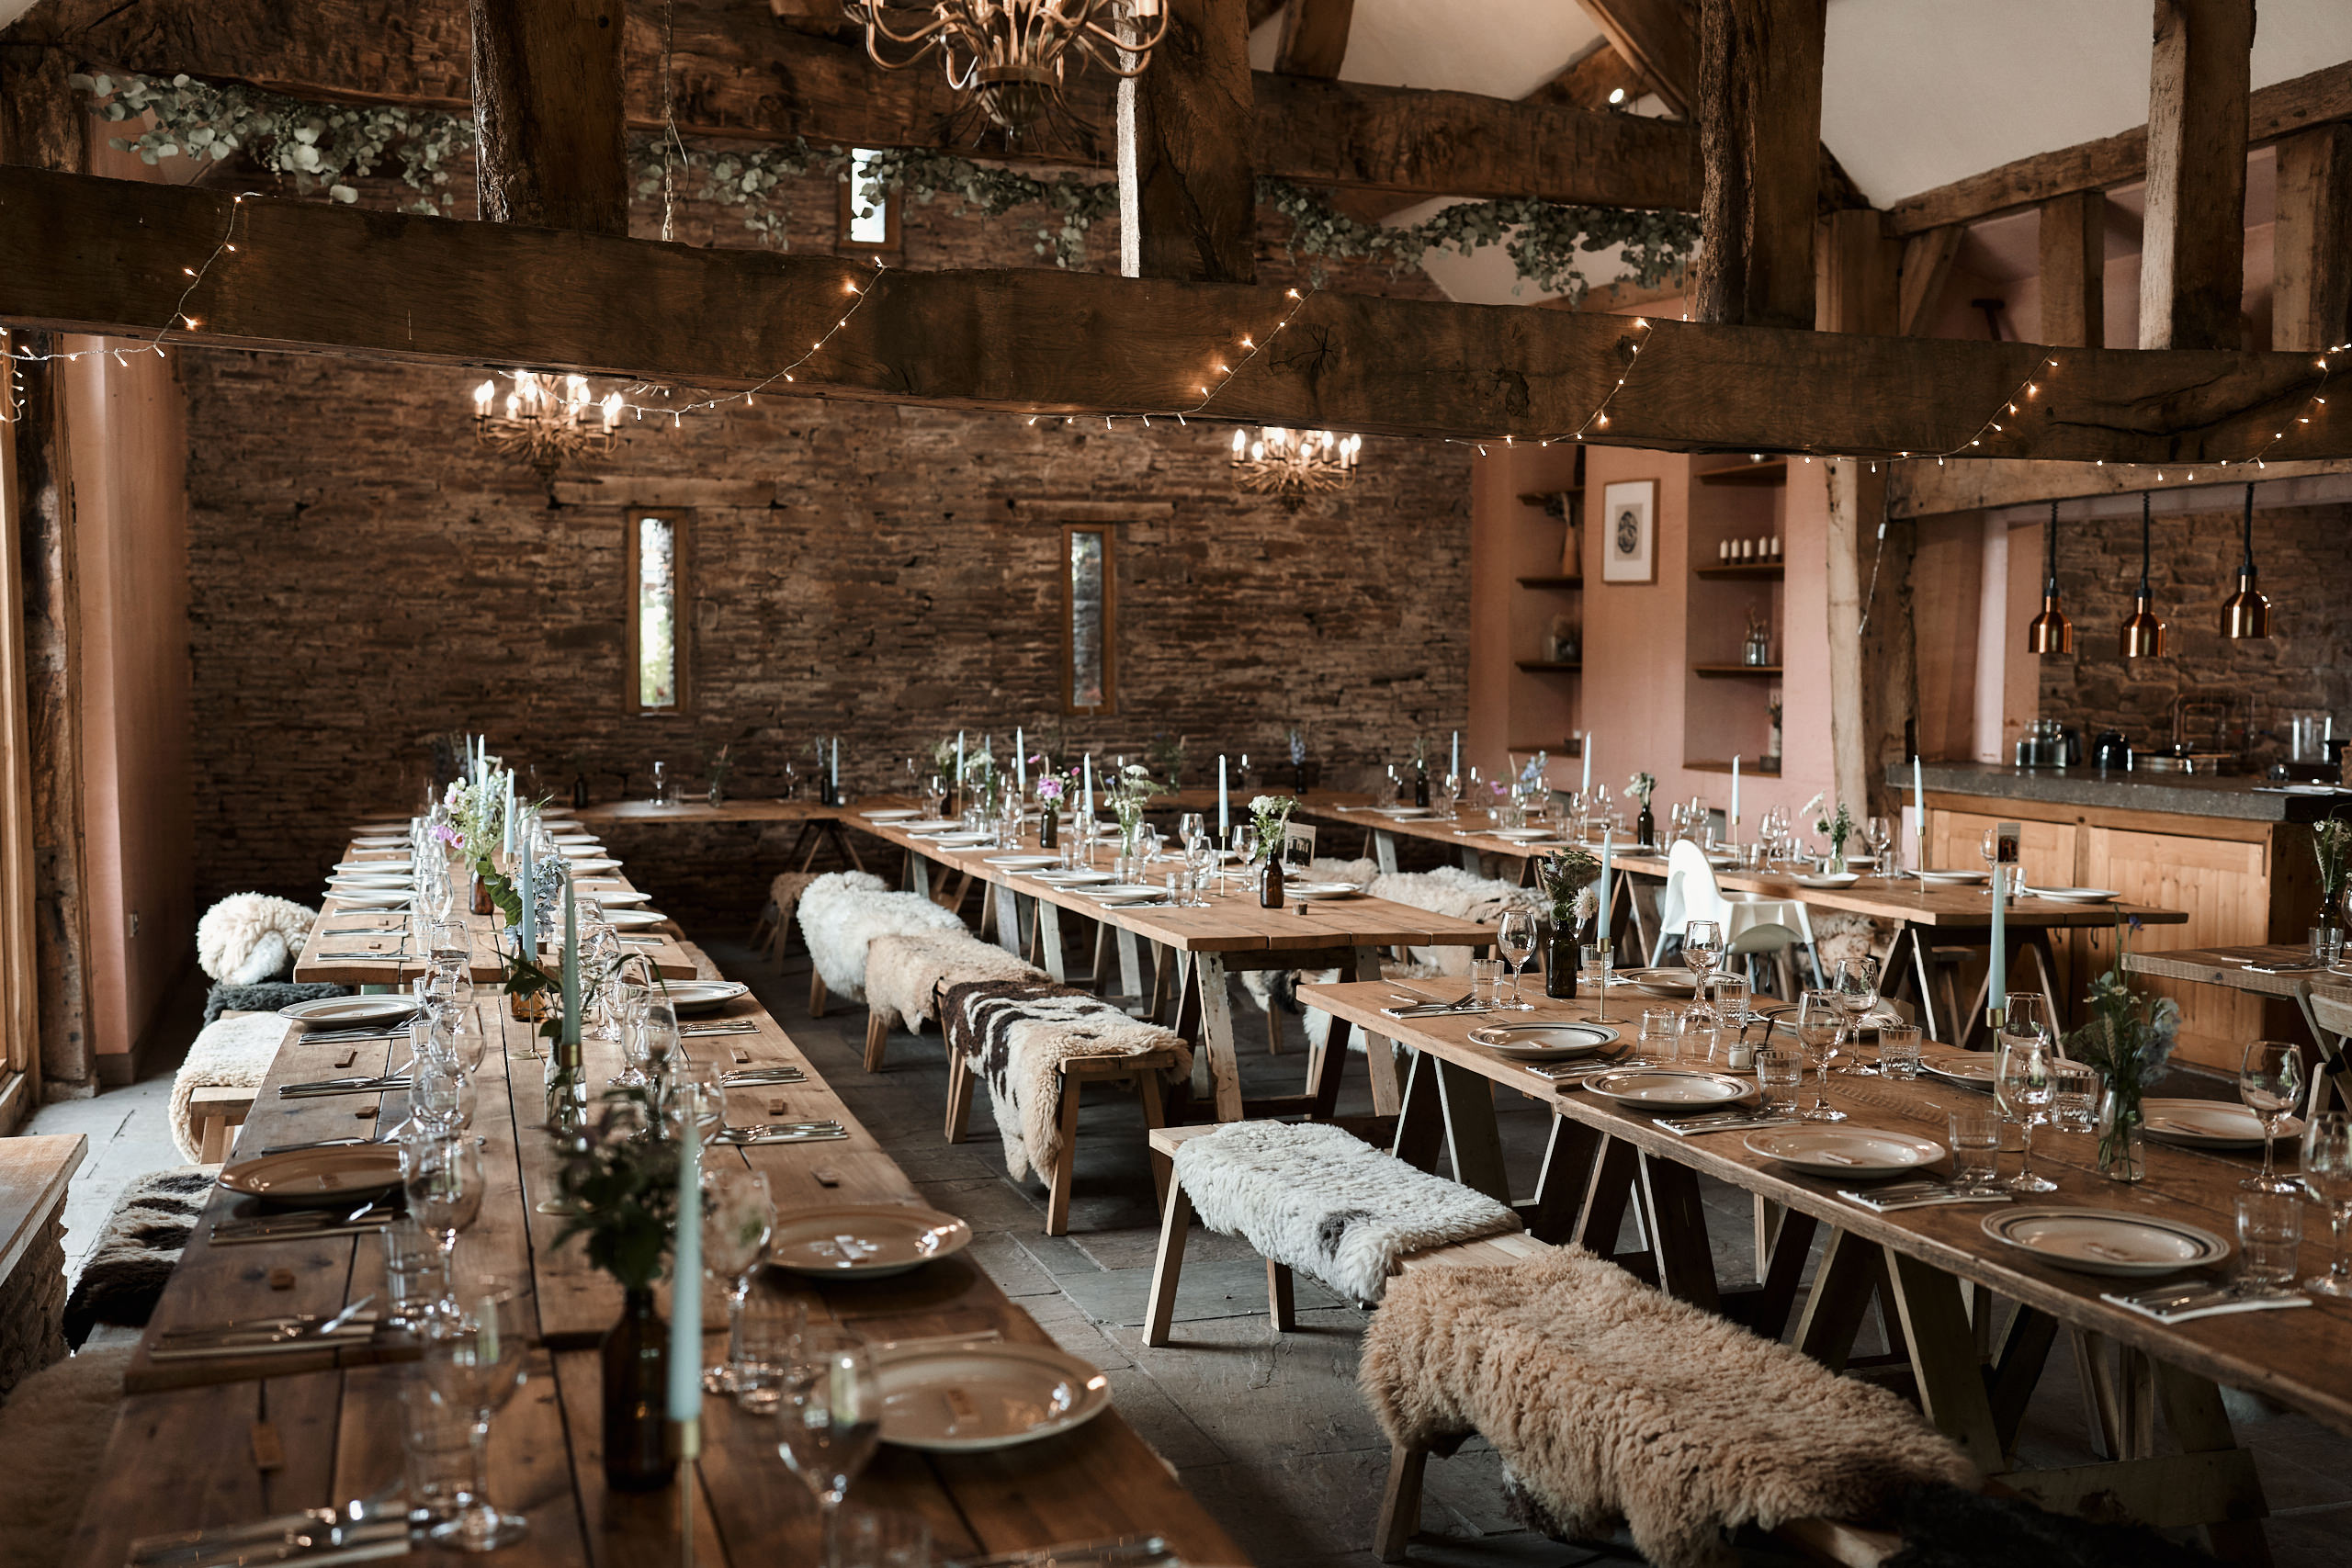 A simple country-style barn wedding with wooden tables and chairs.